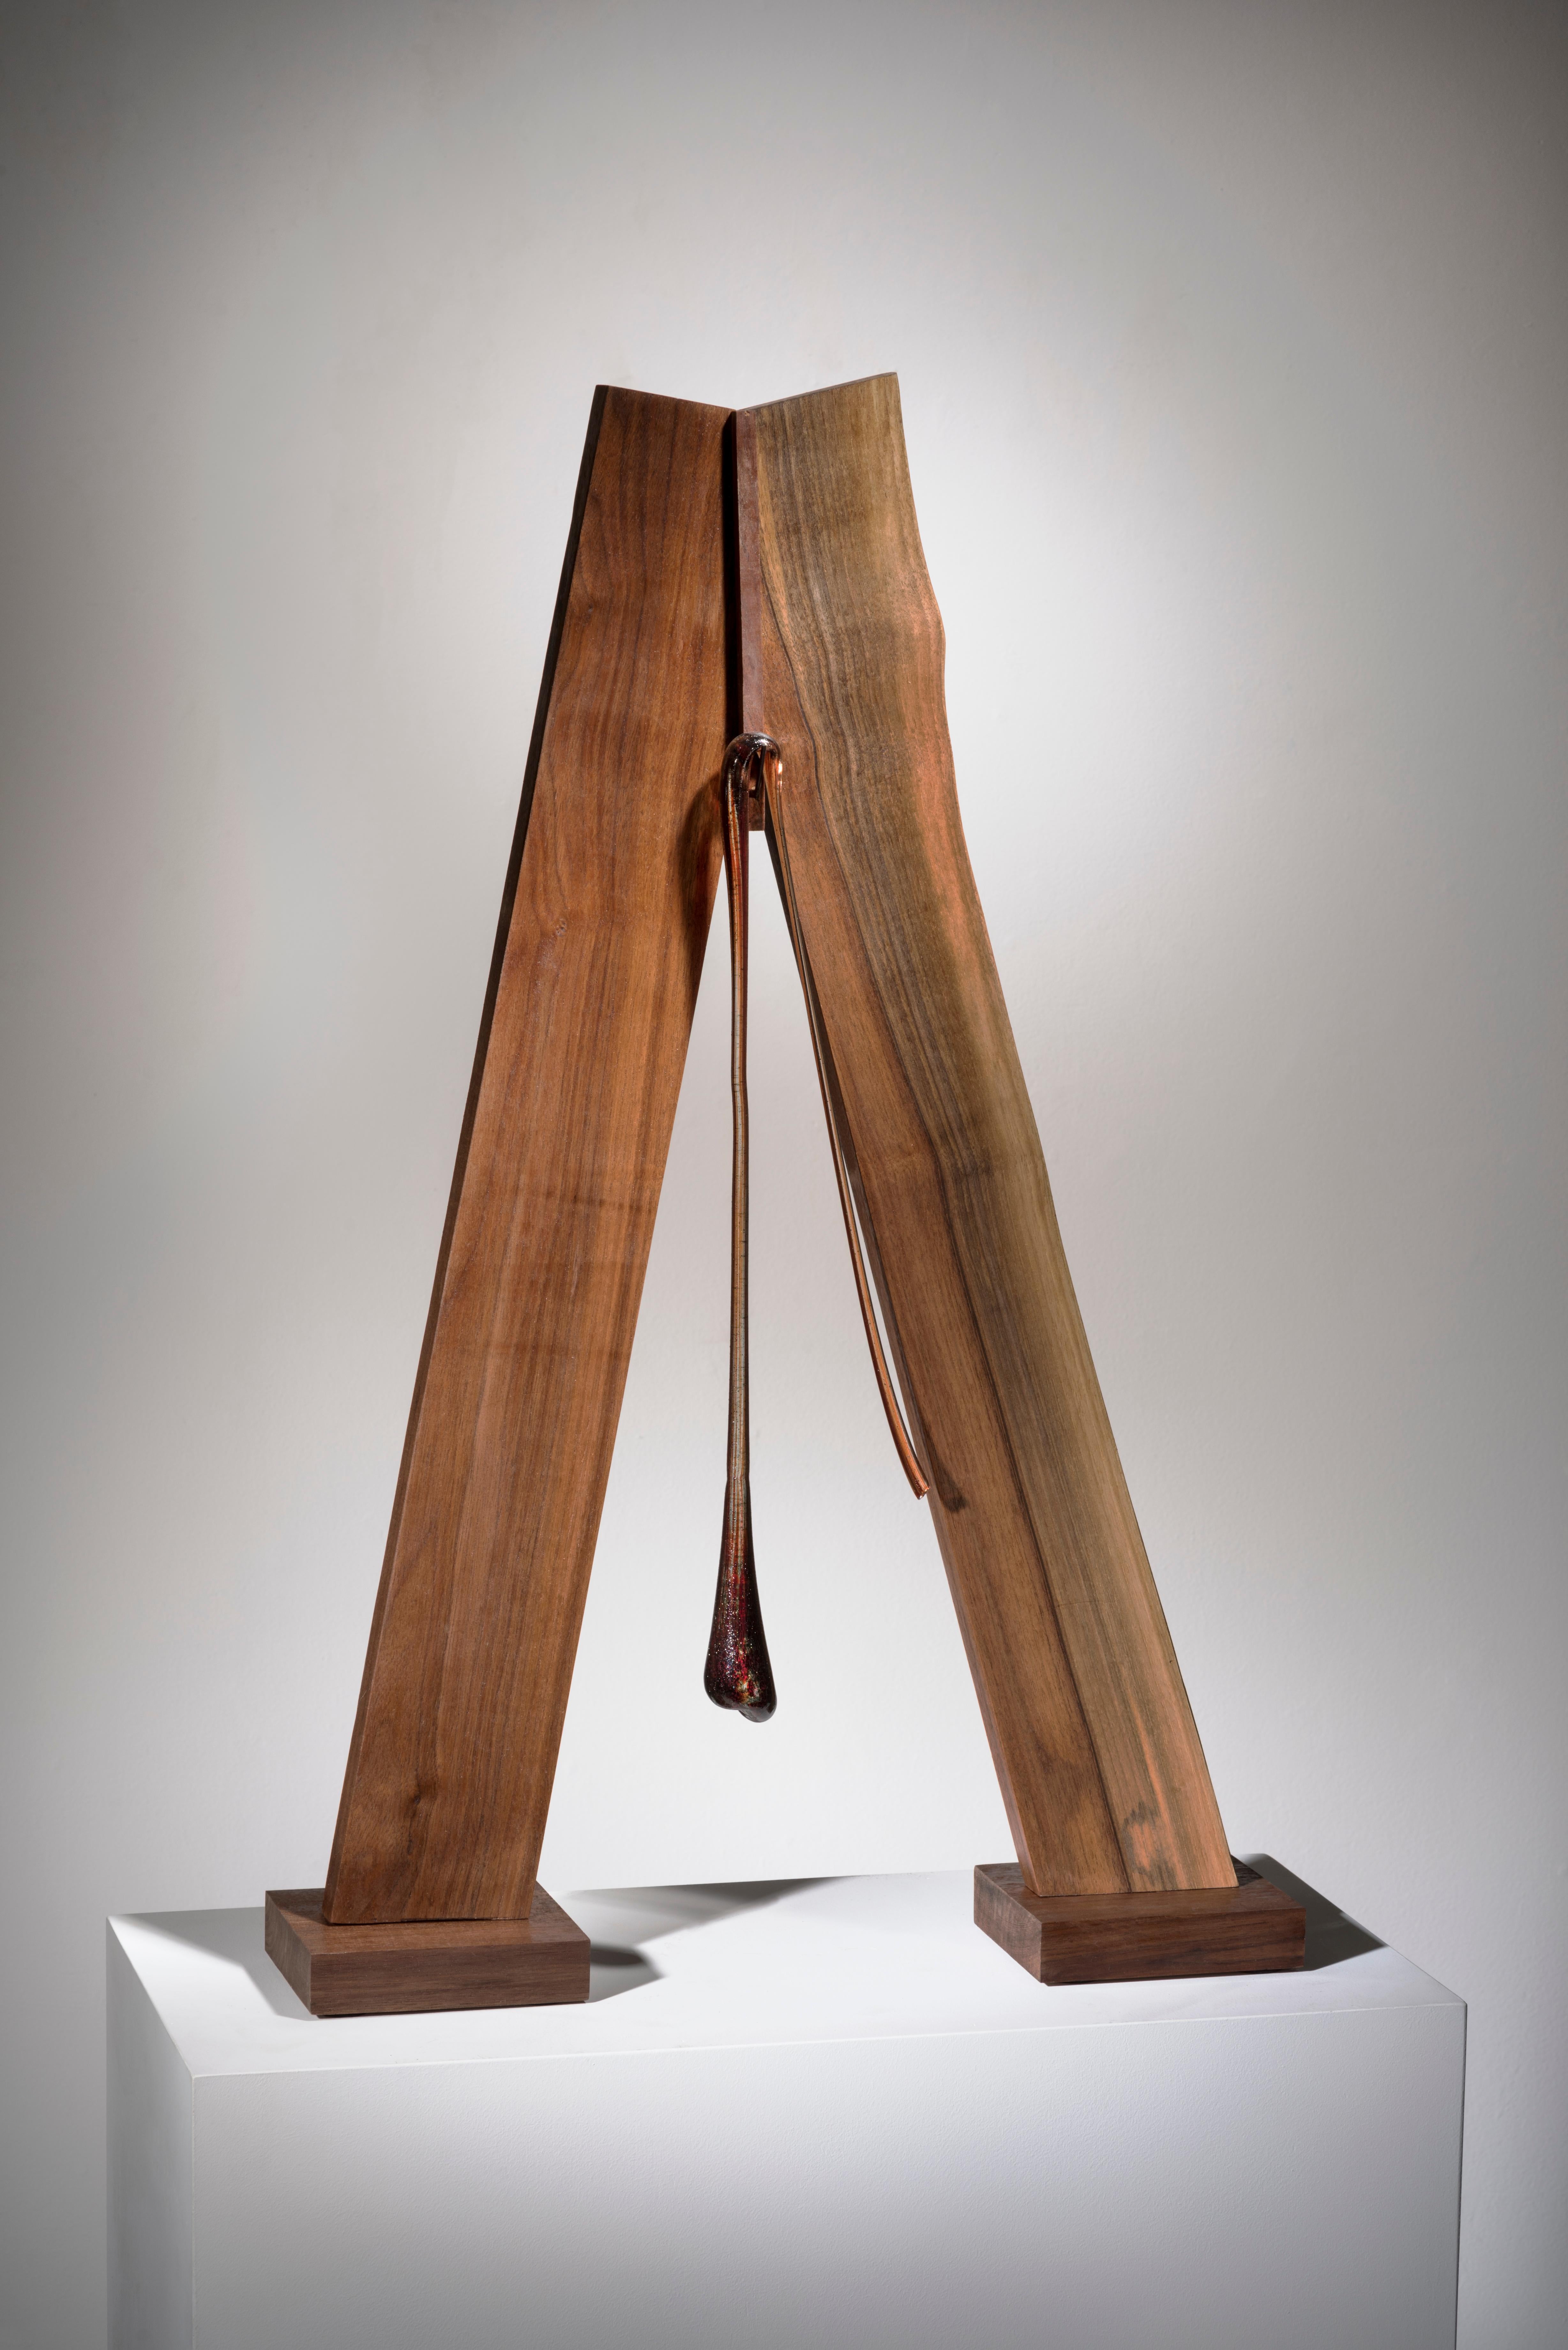 Betty McGeehan Abstract Sculpture - Minimal Abstract Wood Sculpture: 'Weighing the Consequences'